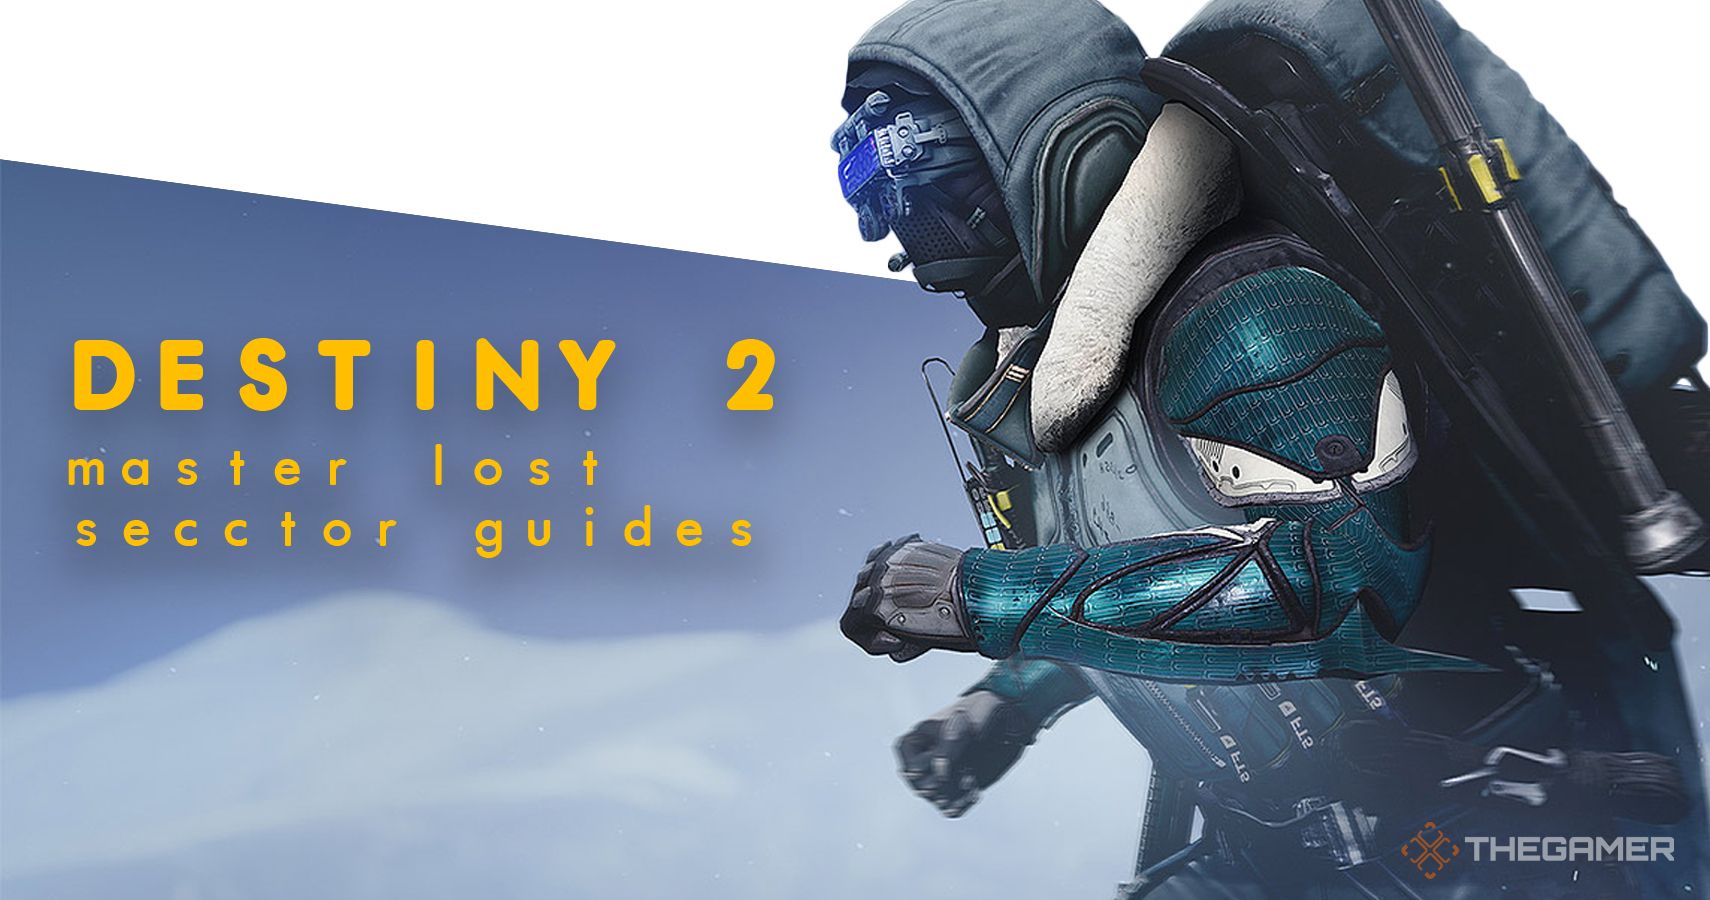 Destiny 2 master lost sector guides